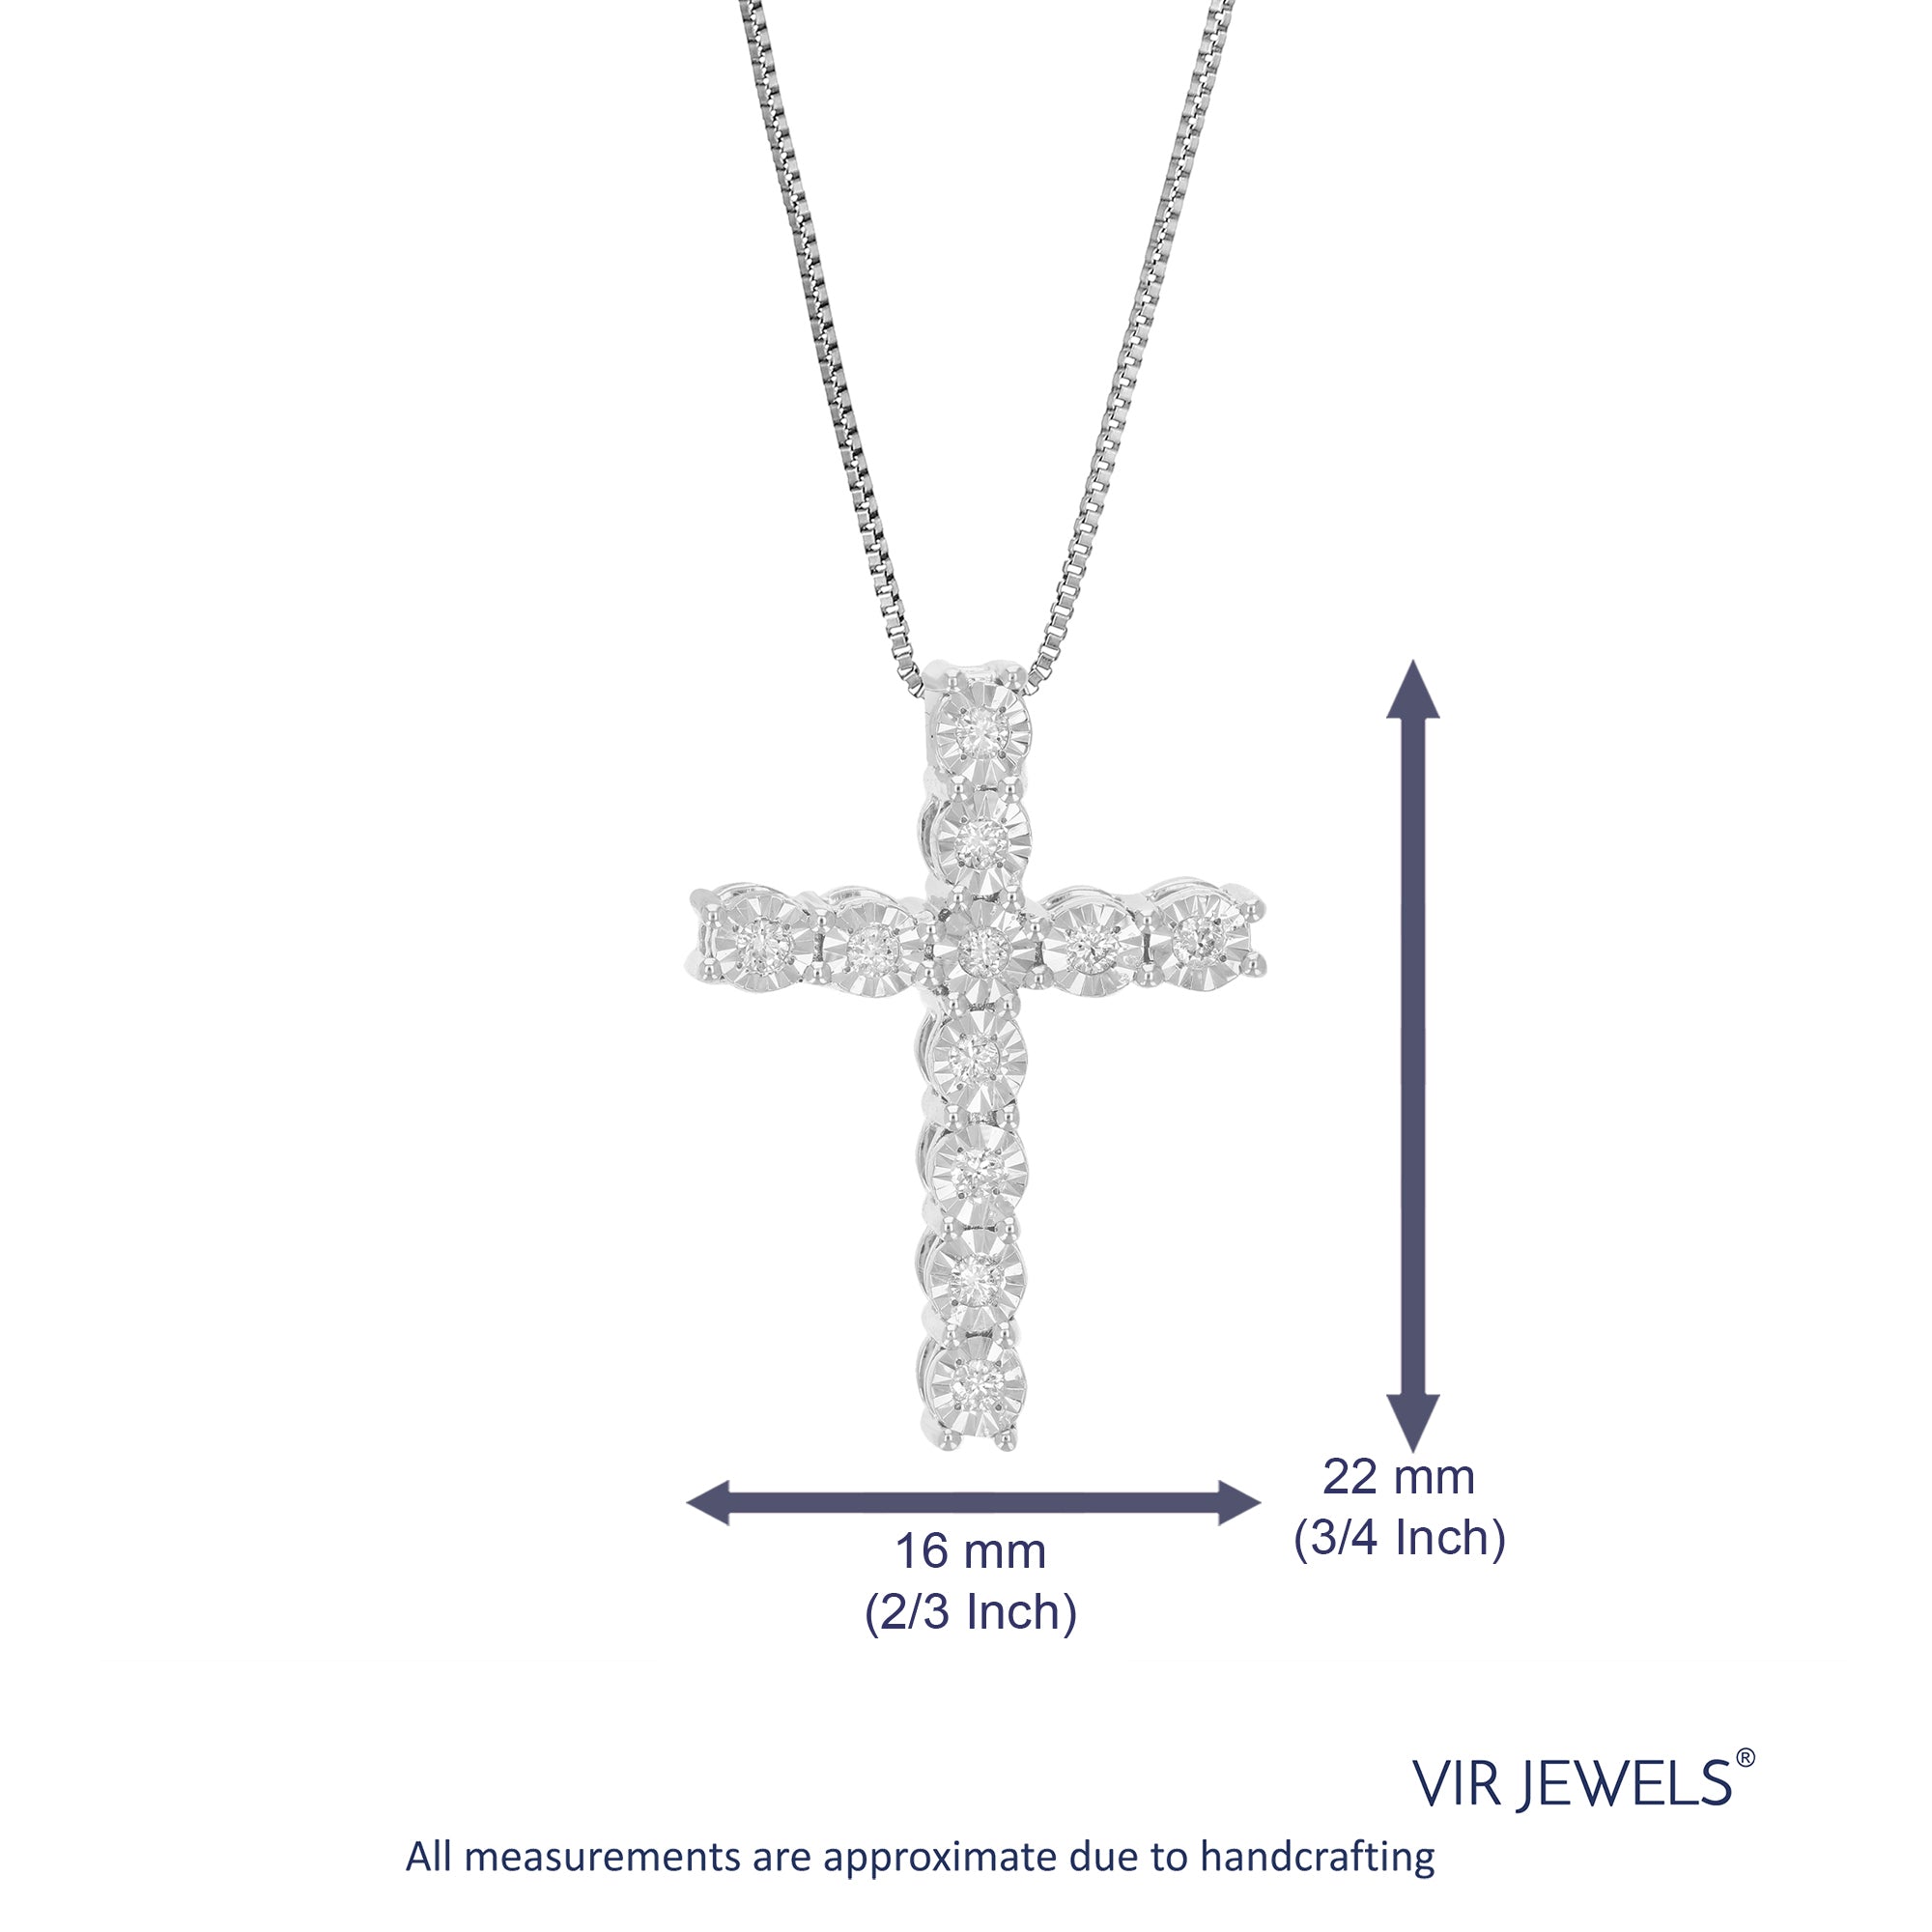 1/6 cttw Diamond Pendant Necklace for Women, Lab Grown Diamond Cross Pendant Necklace in .925 Sterling Silver with Chain, Size 1 Inch